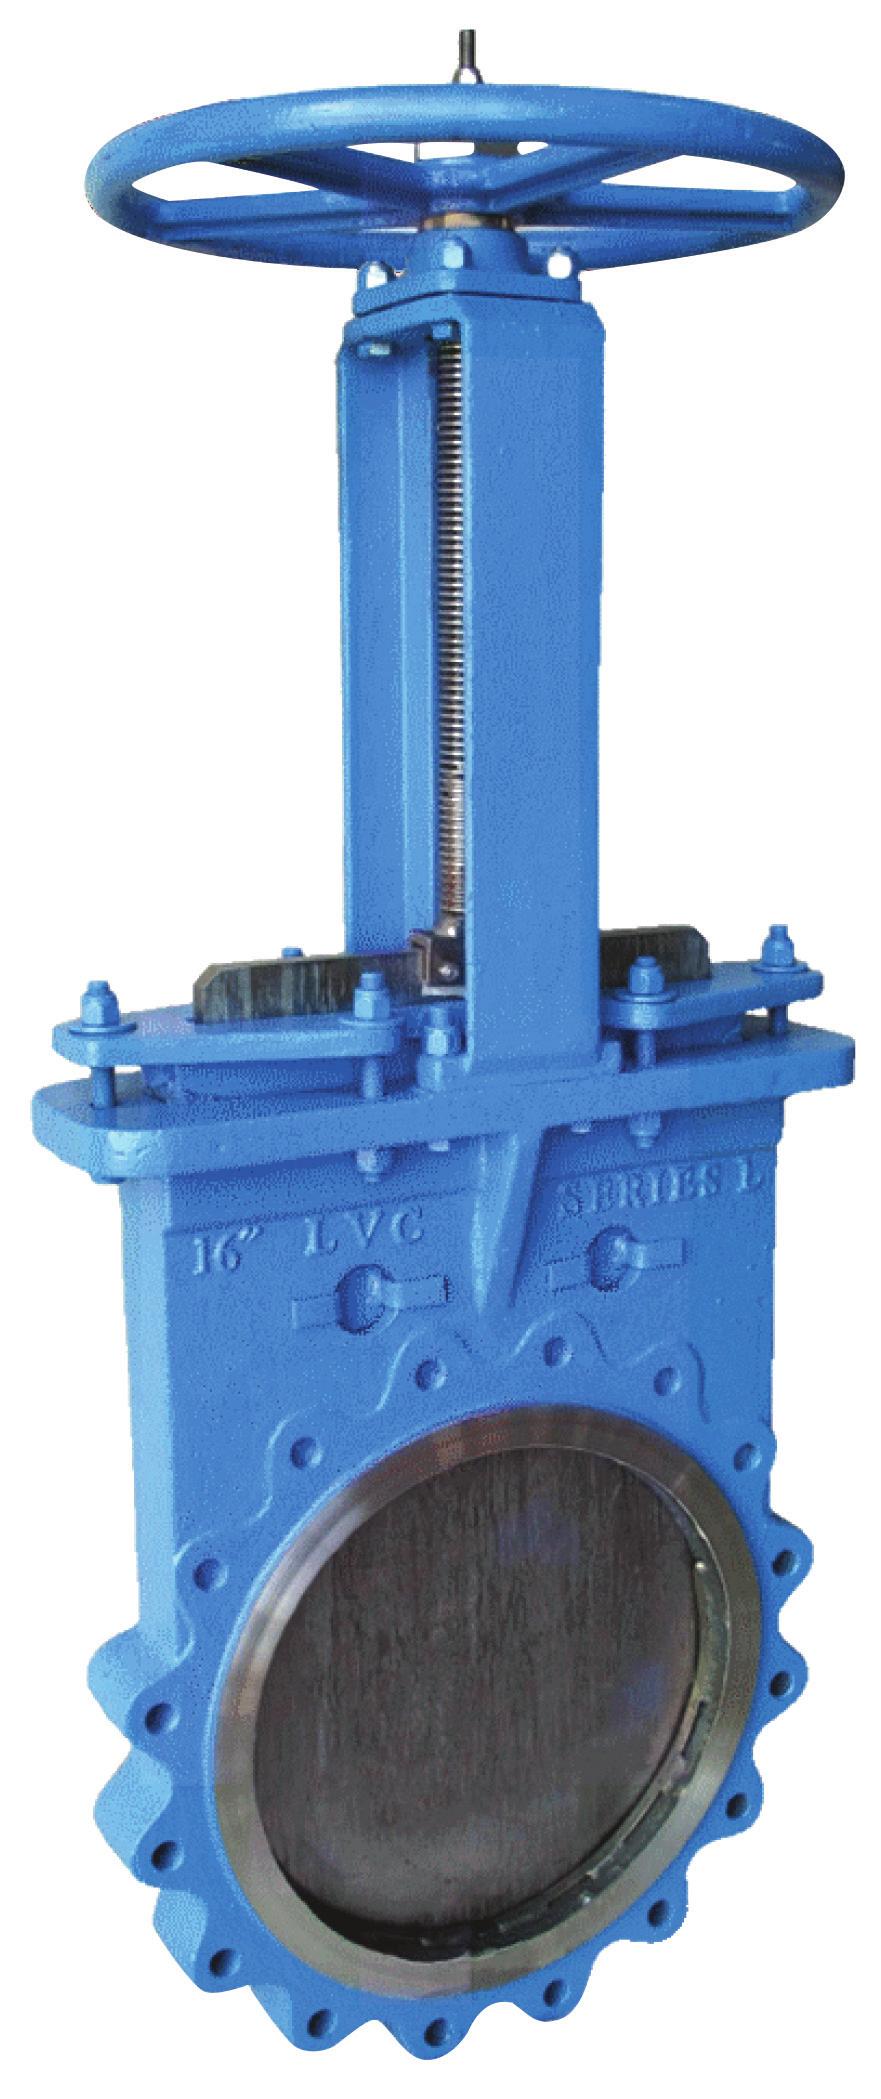 Figure L77 Ductile Iron Body Stainless Steel Lined Resilient Seated Knife Gate Valve Heavy duty cast ductile iron body, packing gland, and yoke.